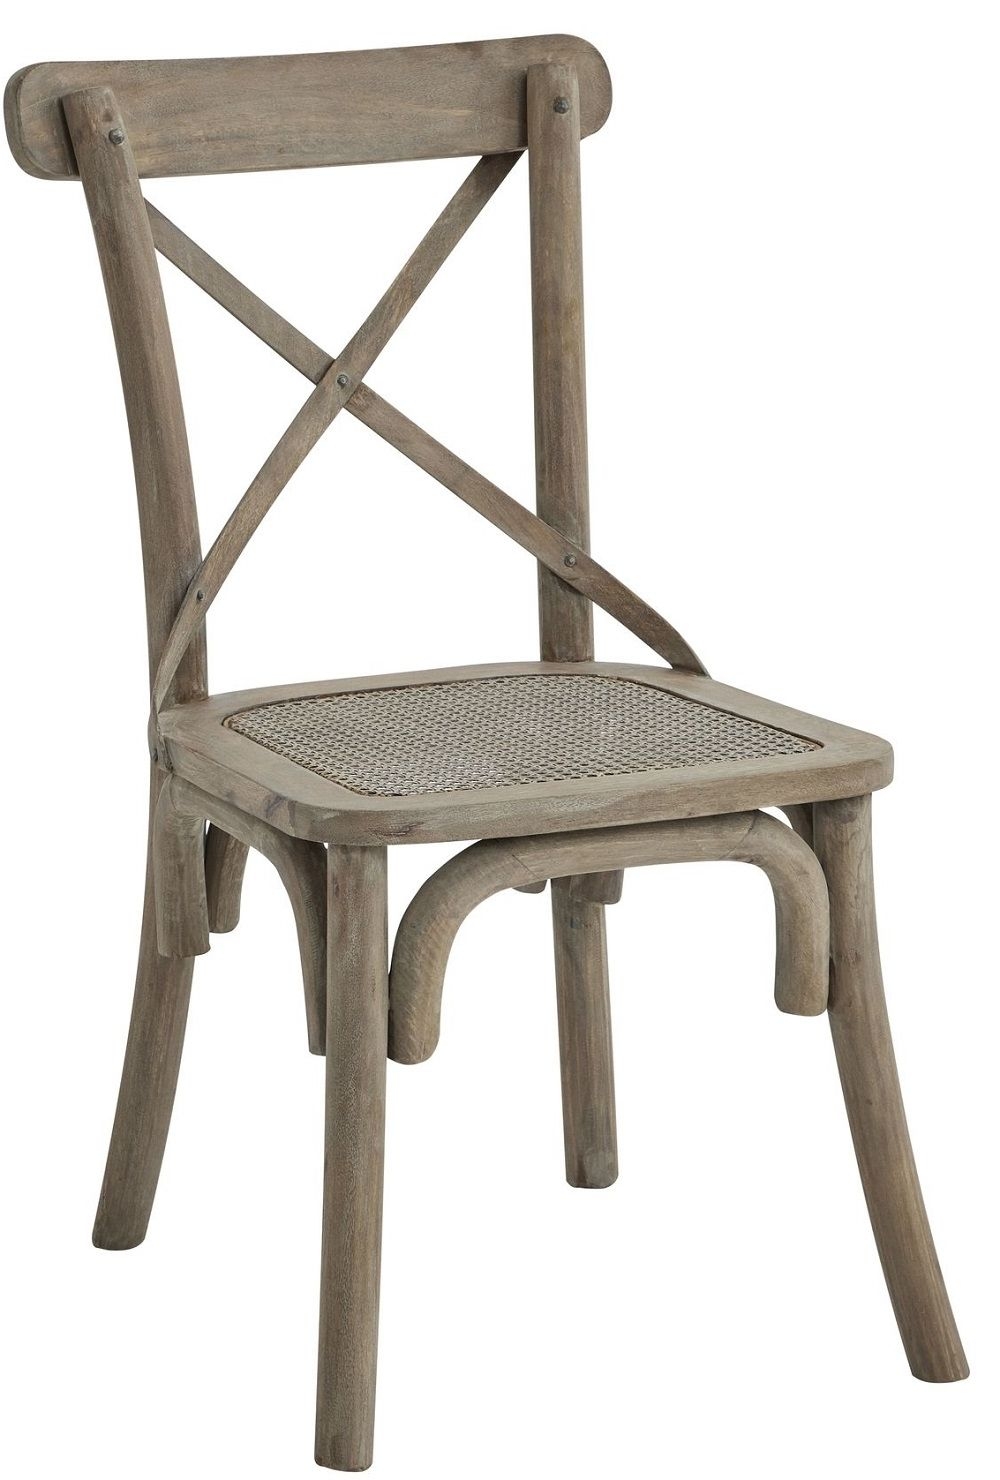 Hill Interiors Wooden Cross Back Rush Seat Dining Chair Sold In Pairs